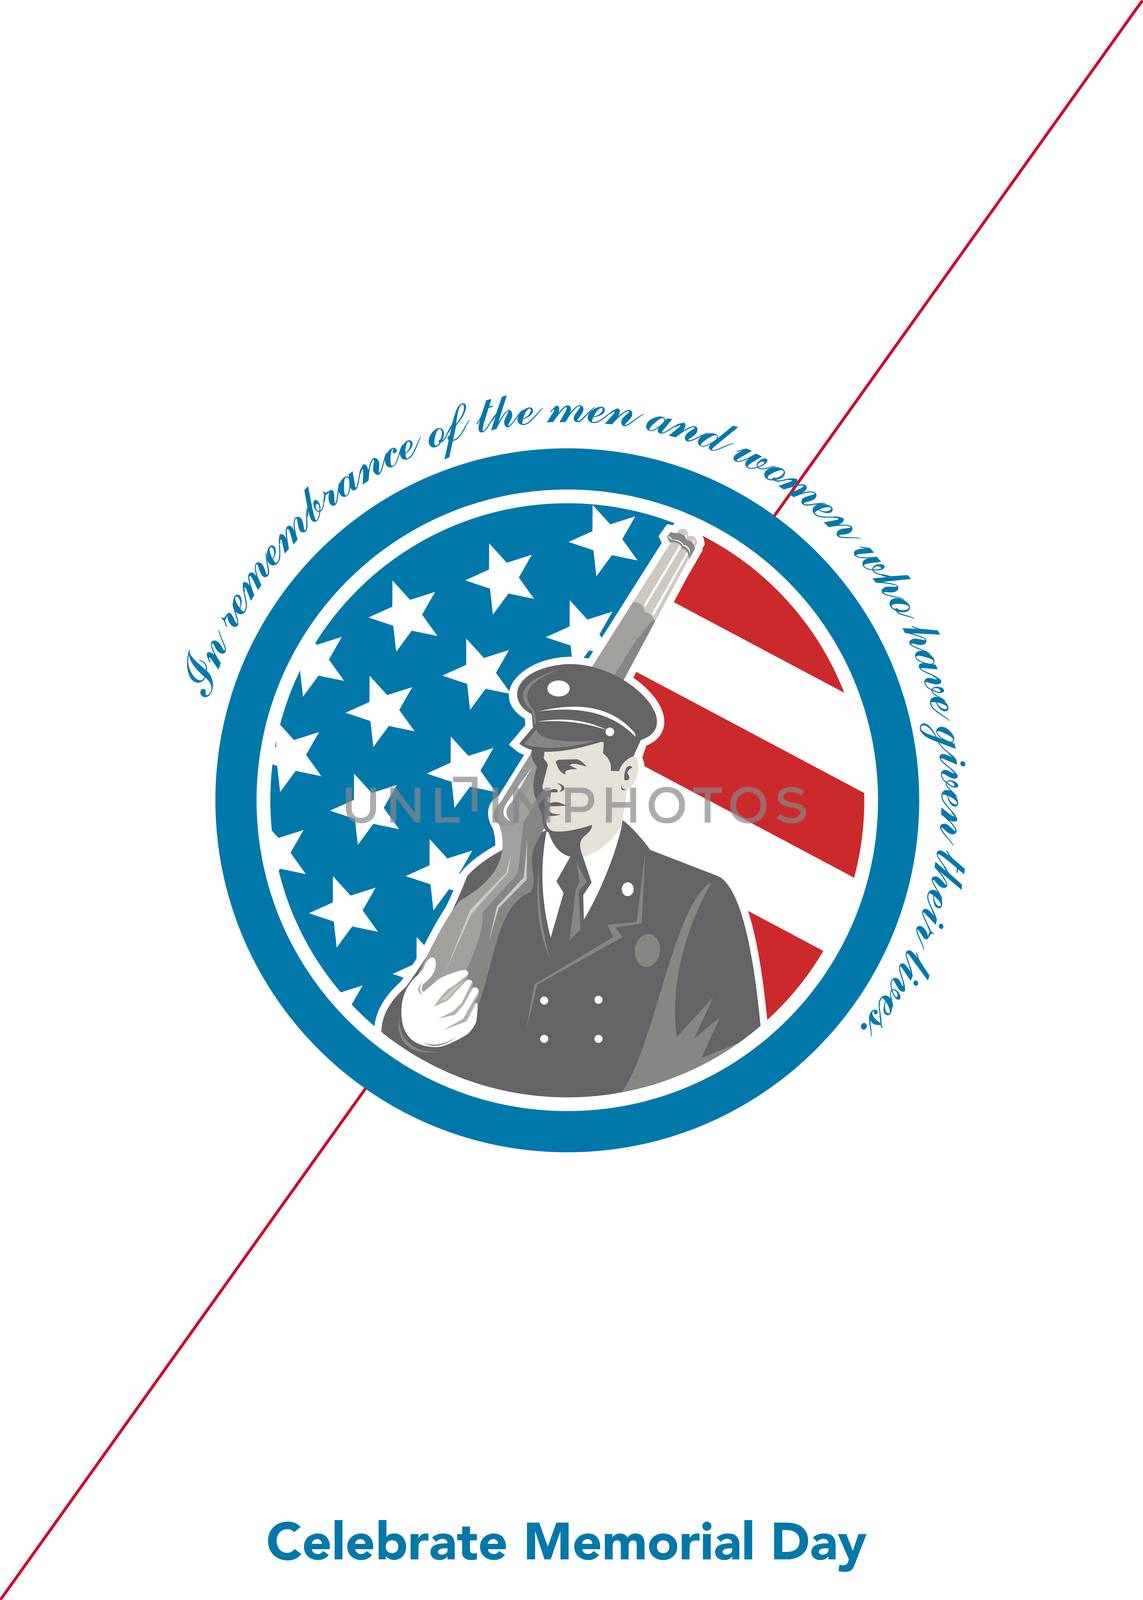 Memorial Day�greeting card featuring an illustration of an American soldier serviceman holding rifle facing side set inside circle with stars and stripes in the background done in retro style and the words In Remembrance of the men and women who have given their lives, Celebrate Memorial Day